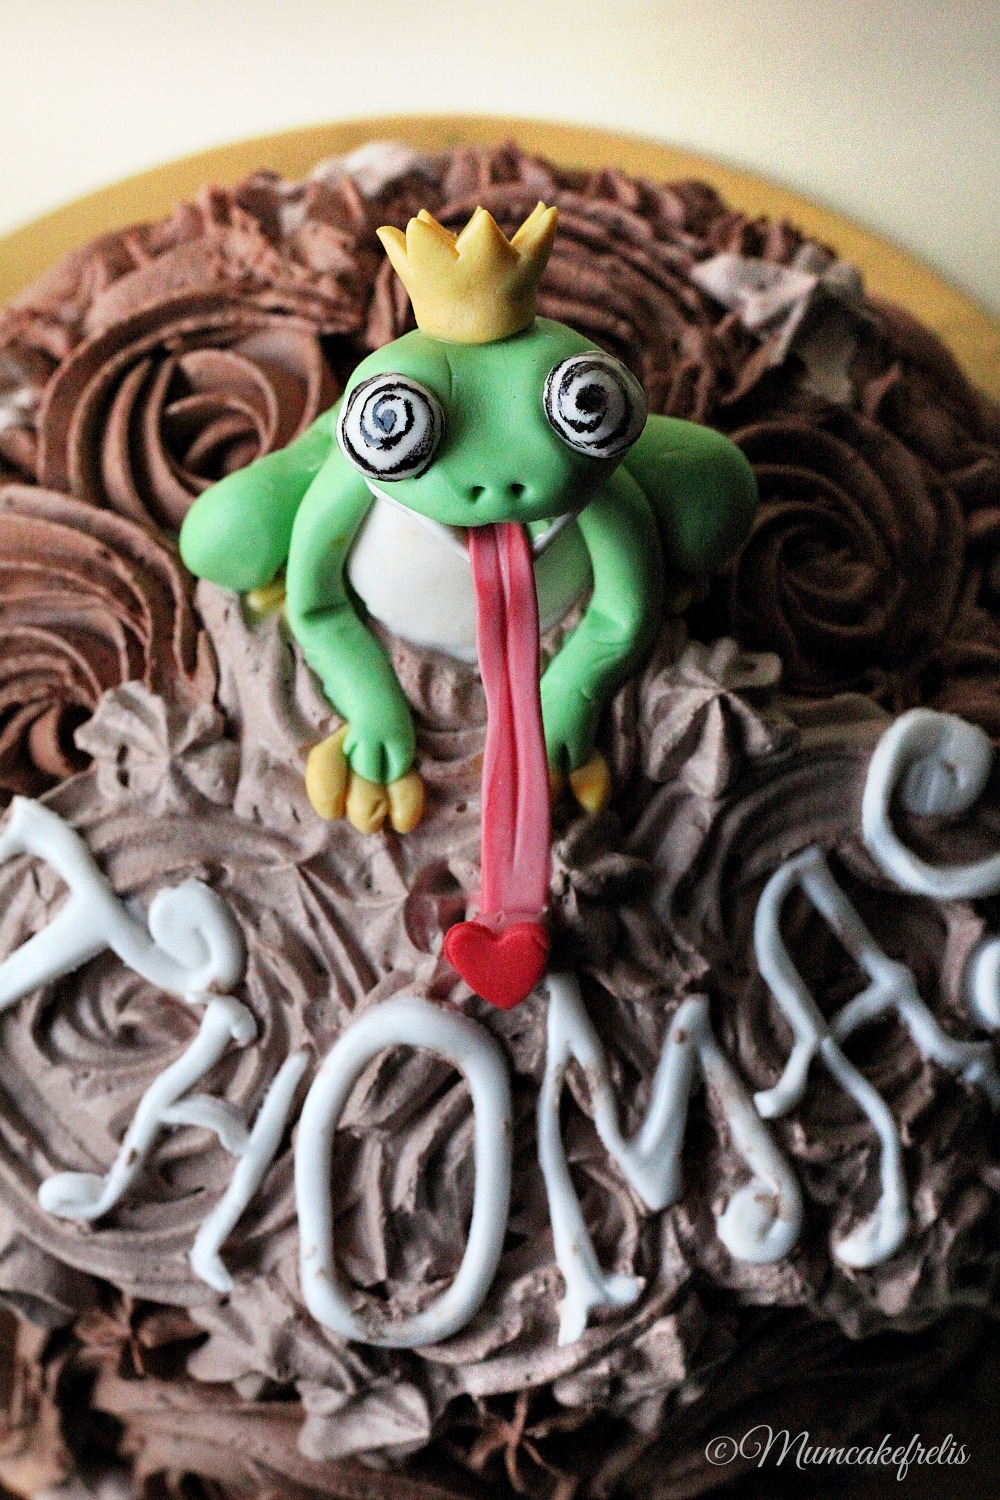  Frogs Cakes, Cakes Ideas, Cakes Cupcakes, Cakes Toppers, Celebrity Cakes, Cakes Design, Cakes Woodland, Frogs Prince Cakes